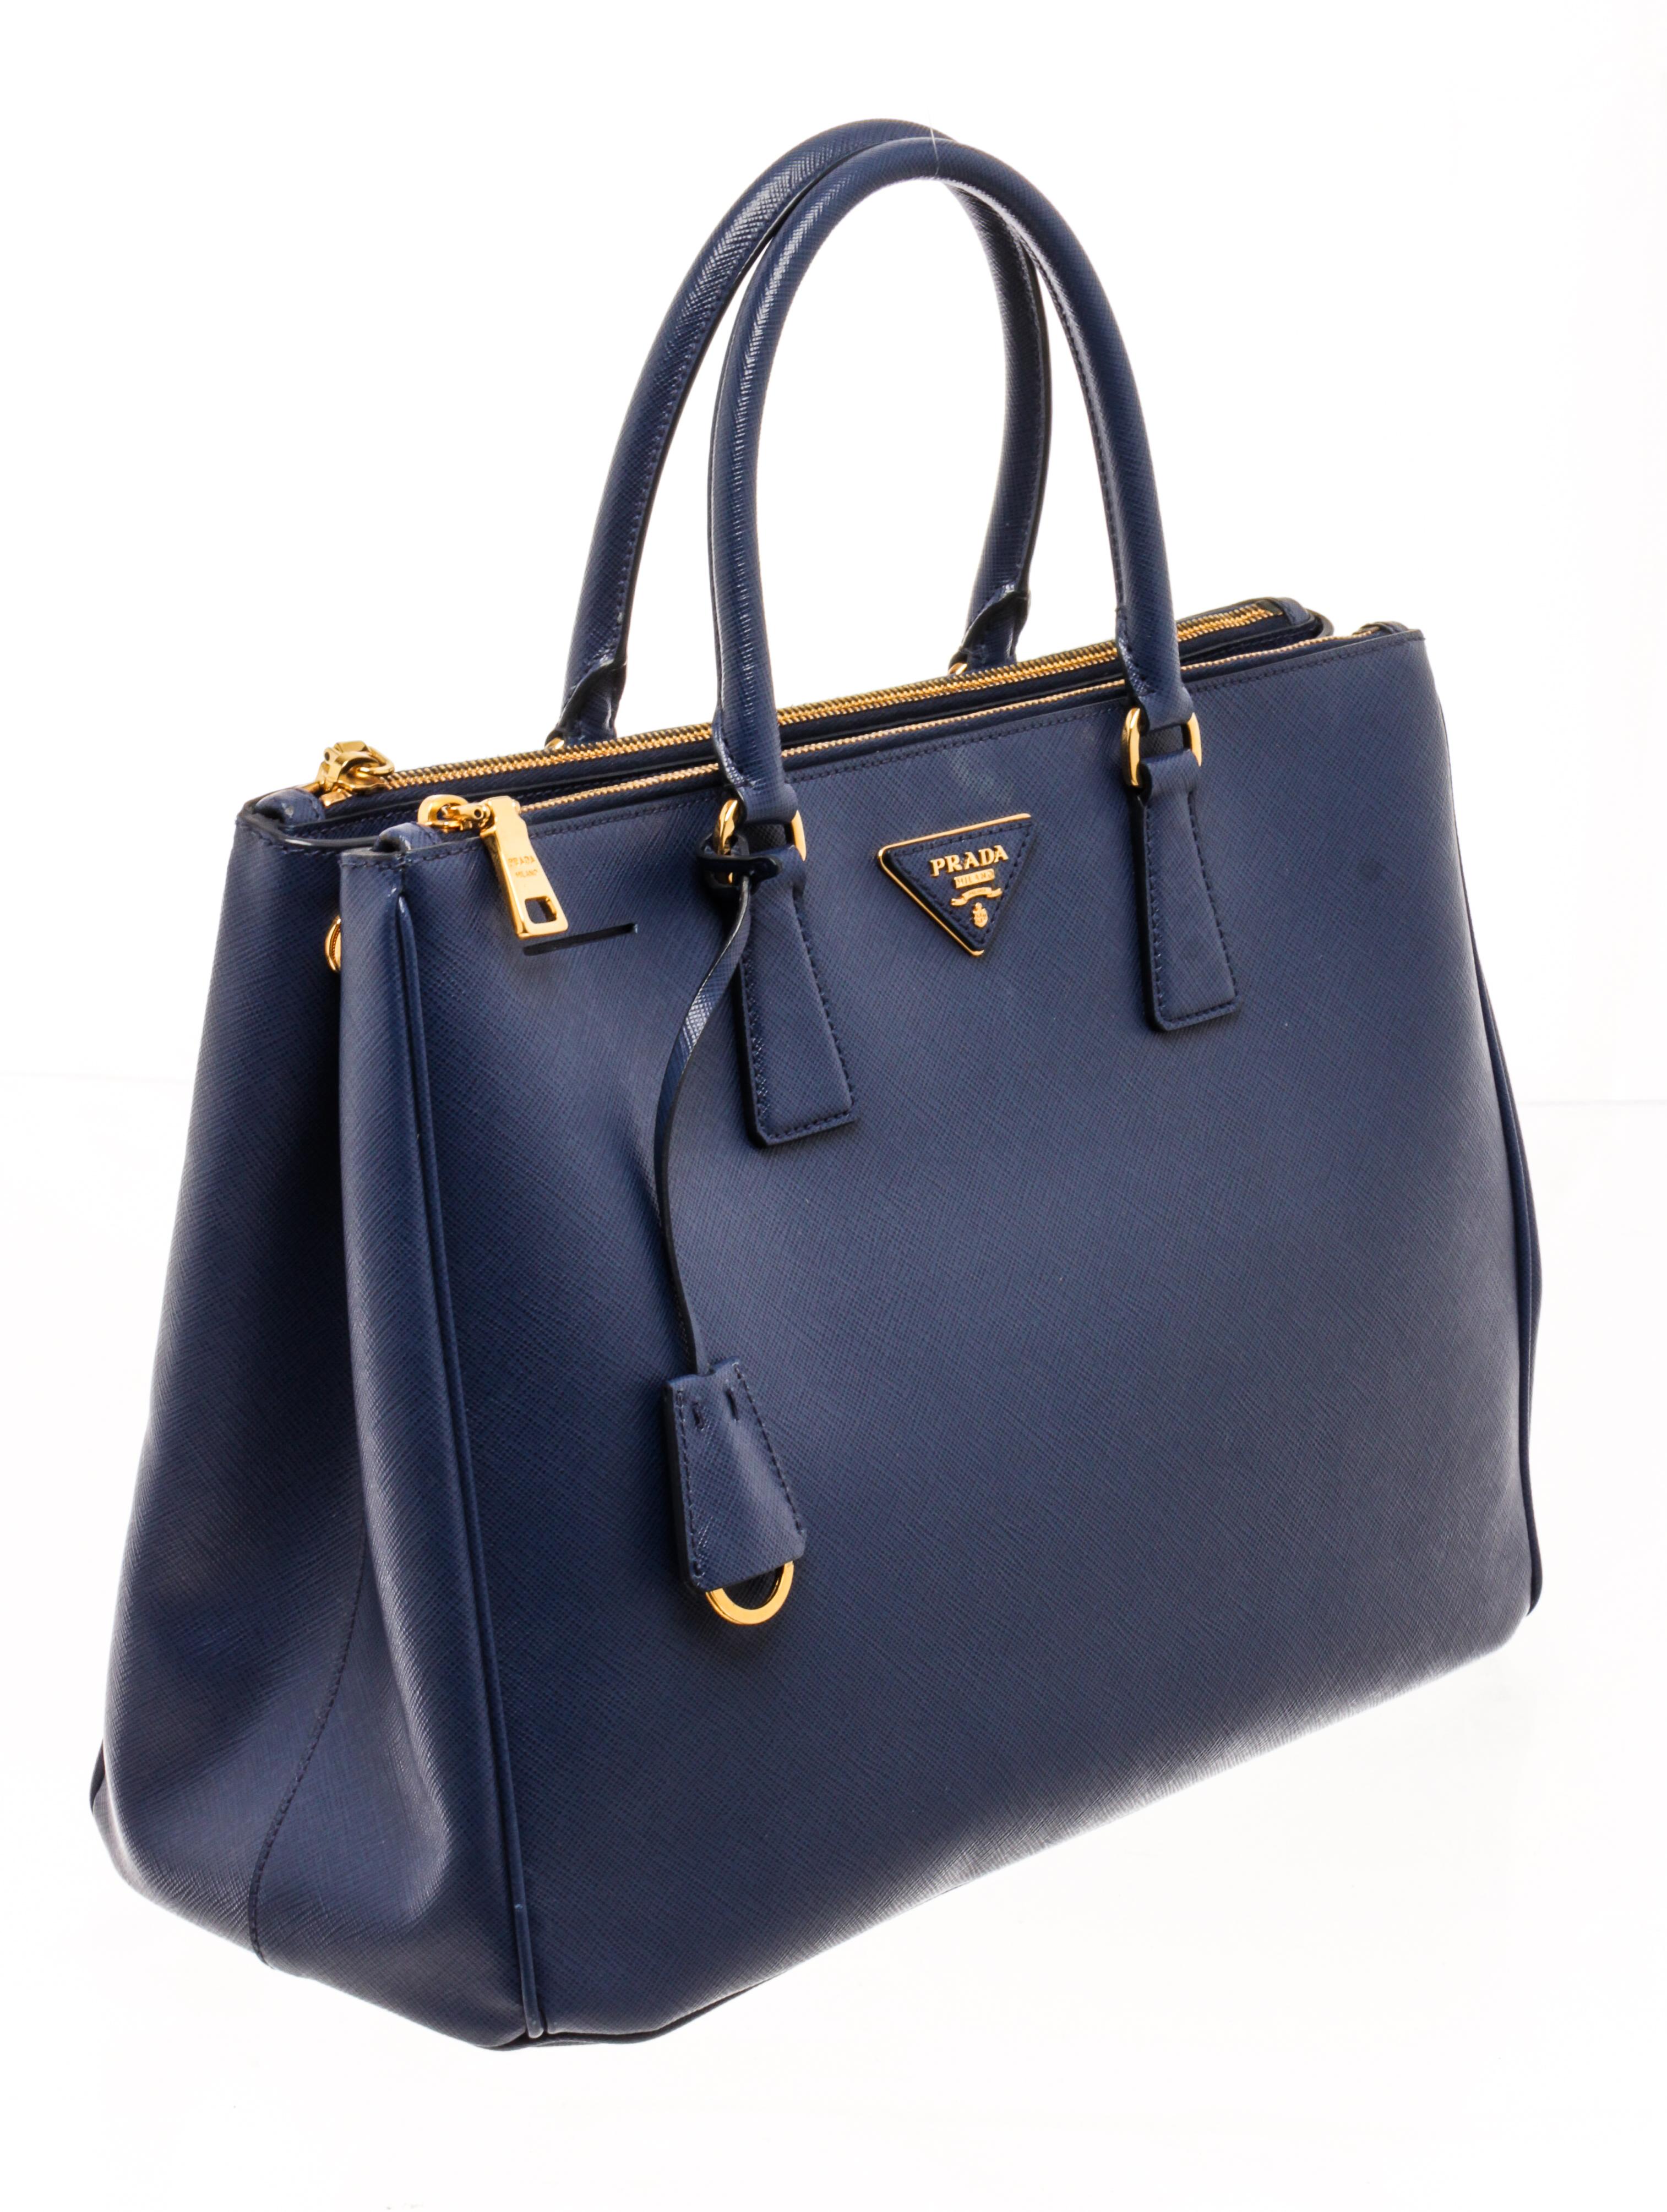 Prada Navy Blue Saffiano Leather Large Galleria Double Zip Tote Bag with this beauty in navy blue is crafted from saffiano leather and is equipped with two top handles, the brand logo on the front, and gold-tone hardware.

86774MSC